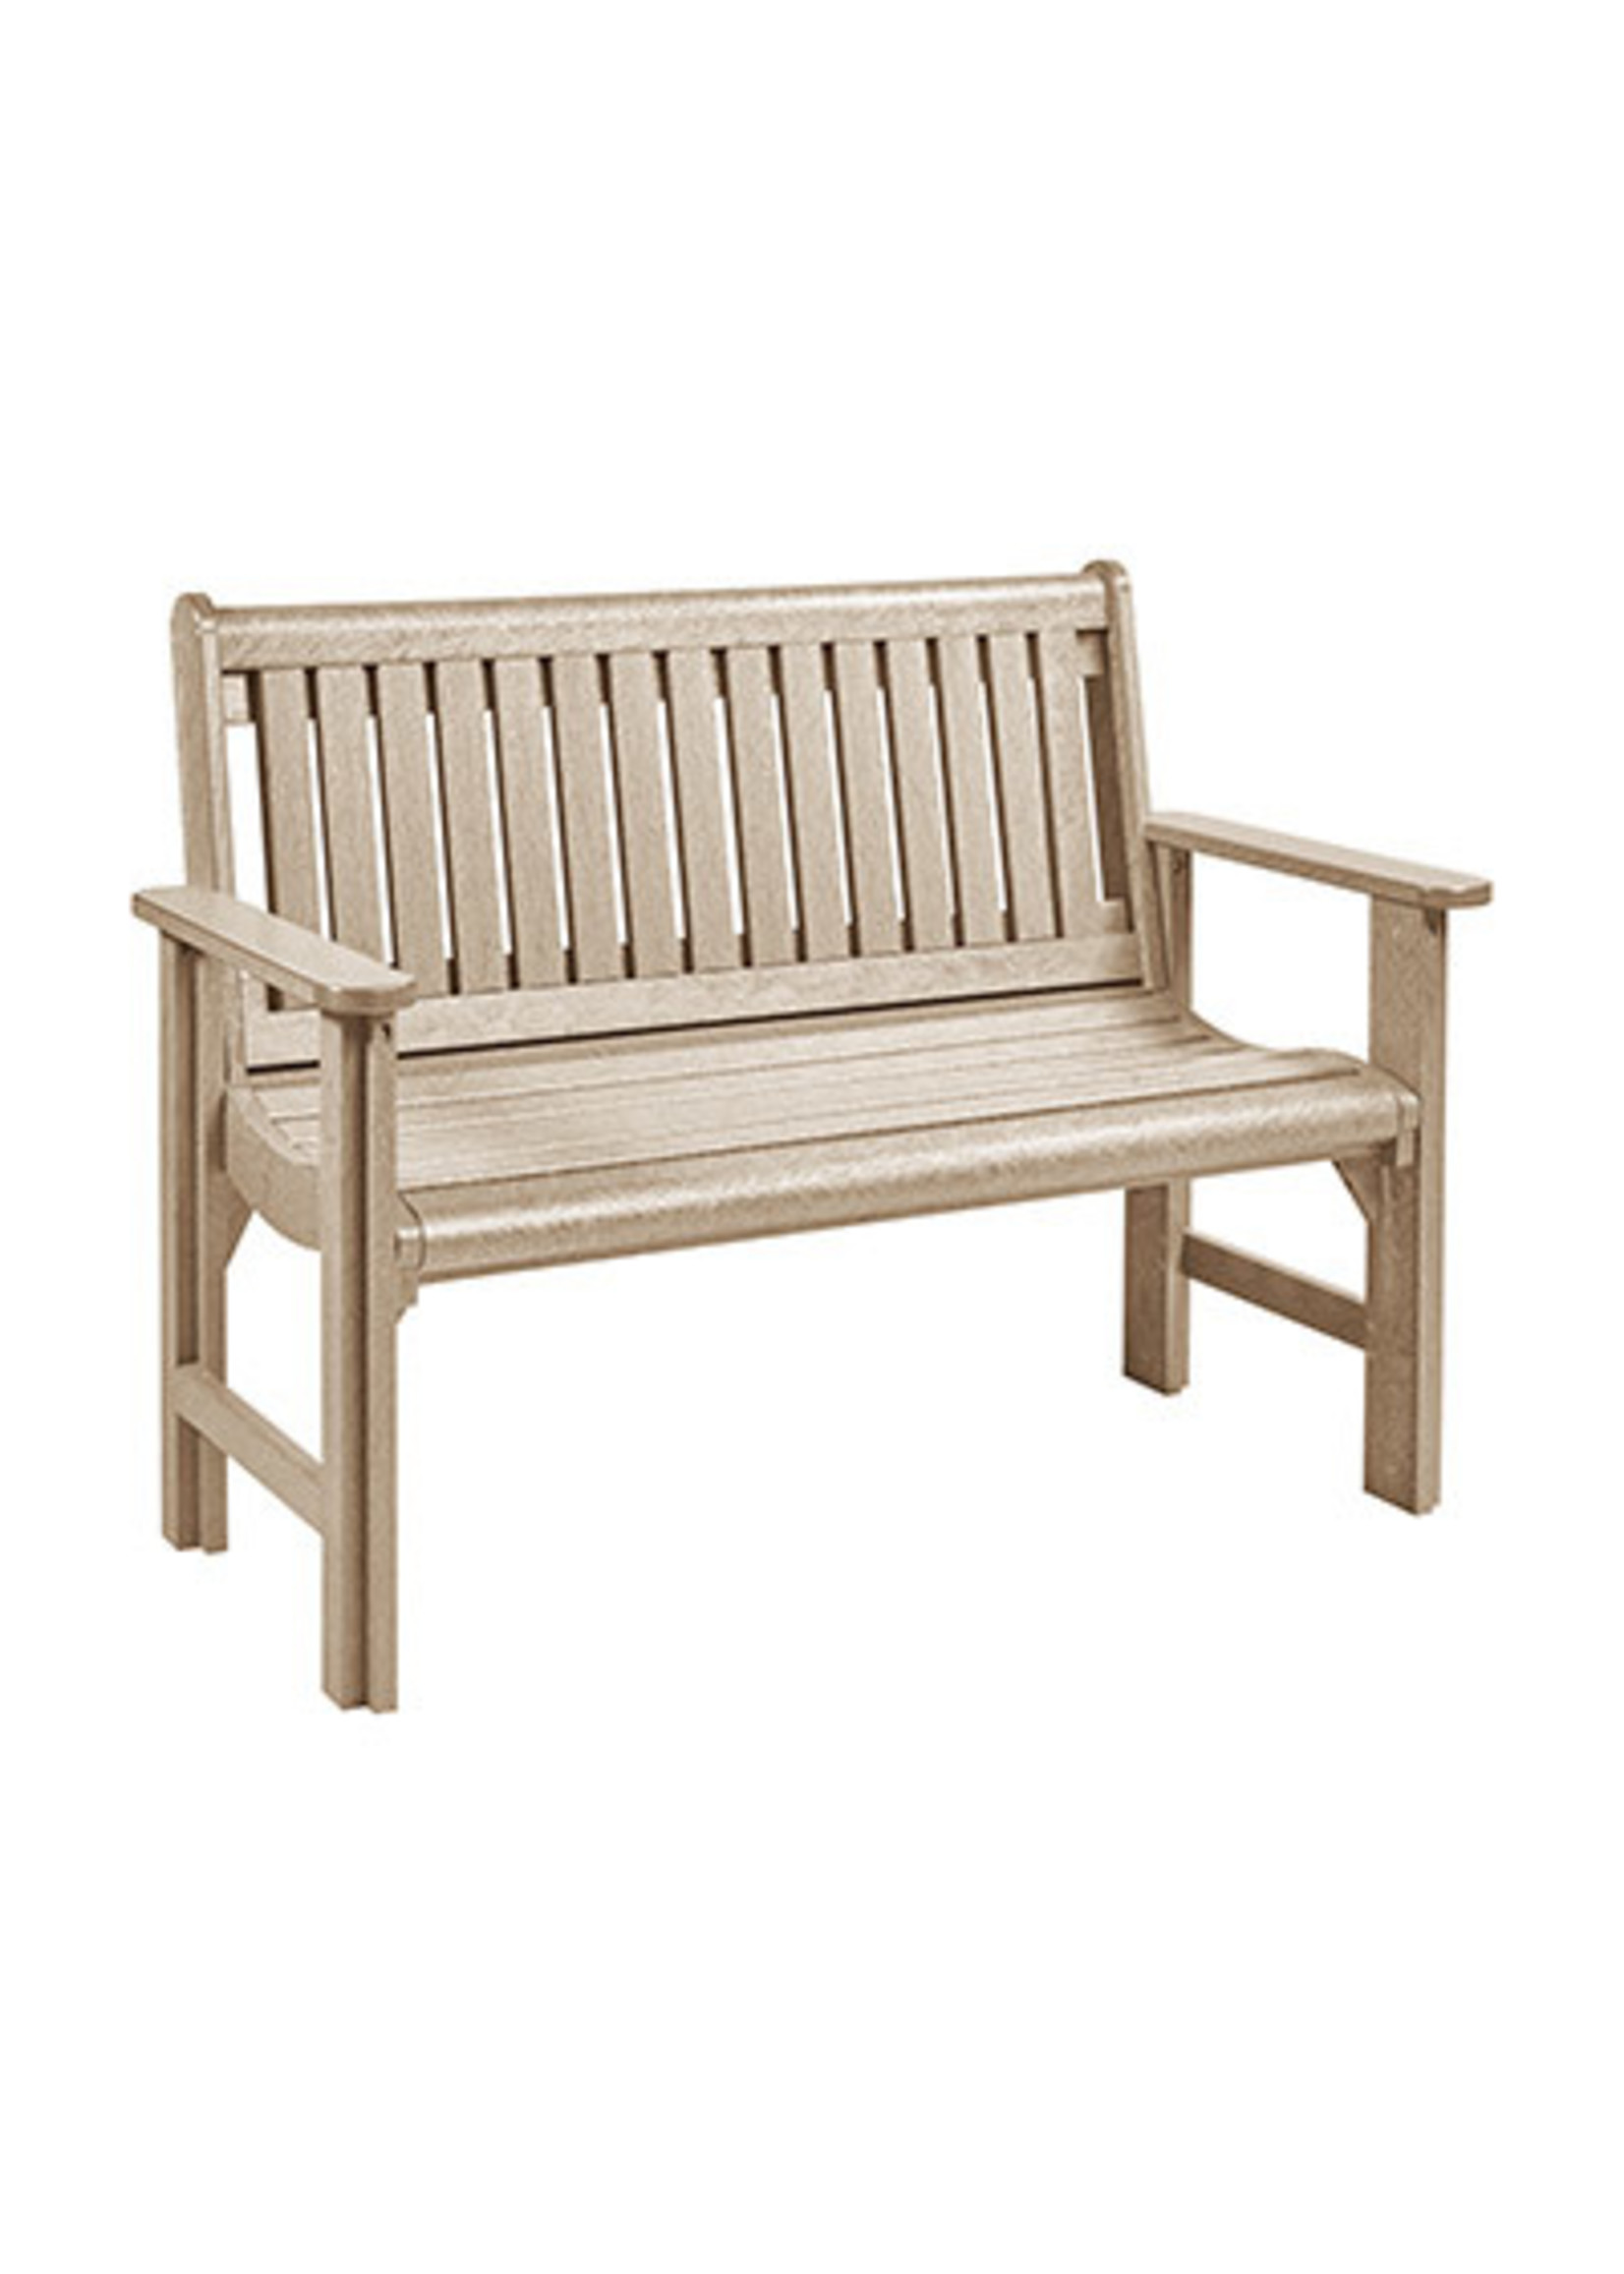 C.R. Plastic Products Garden Bench 4 ft